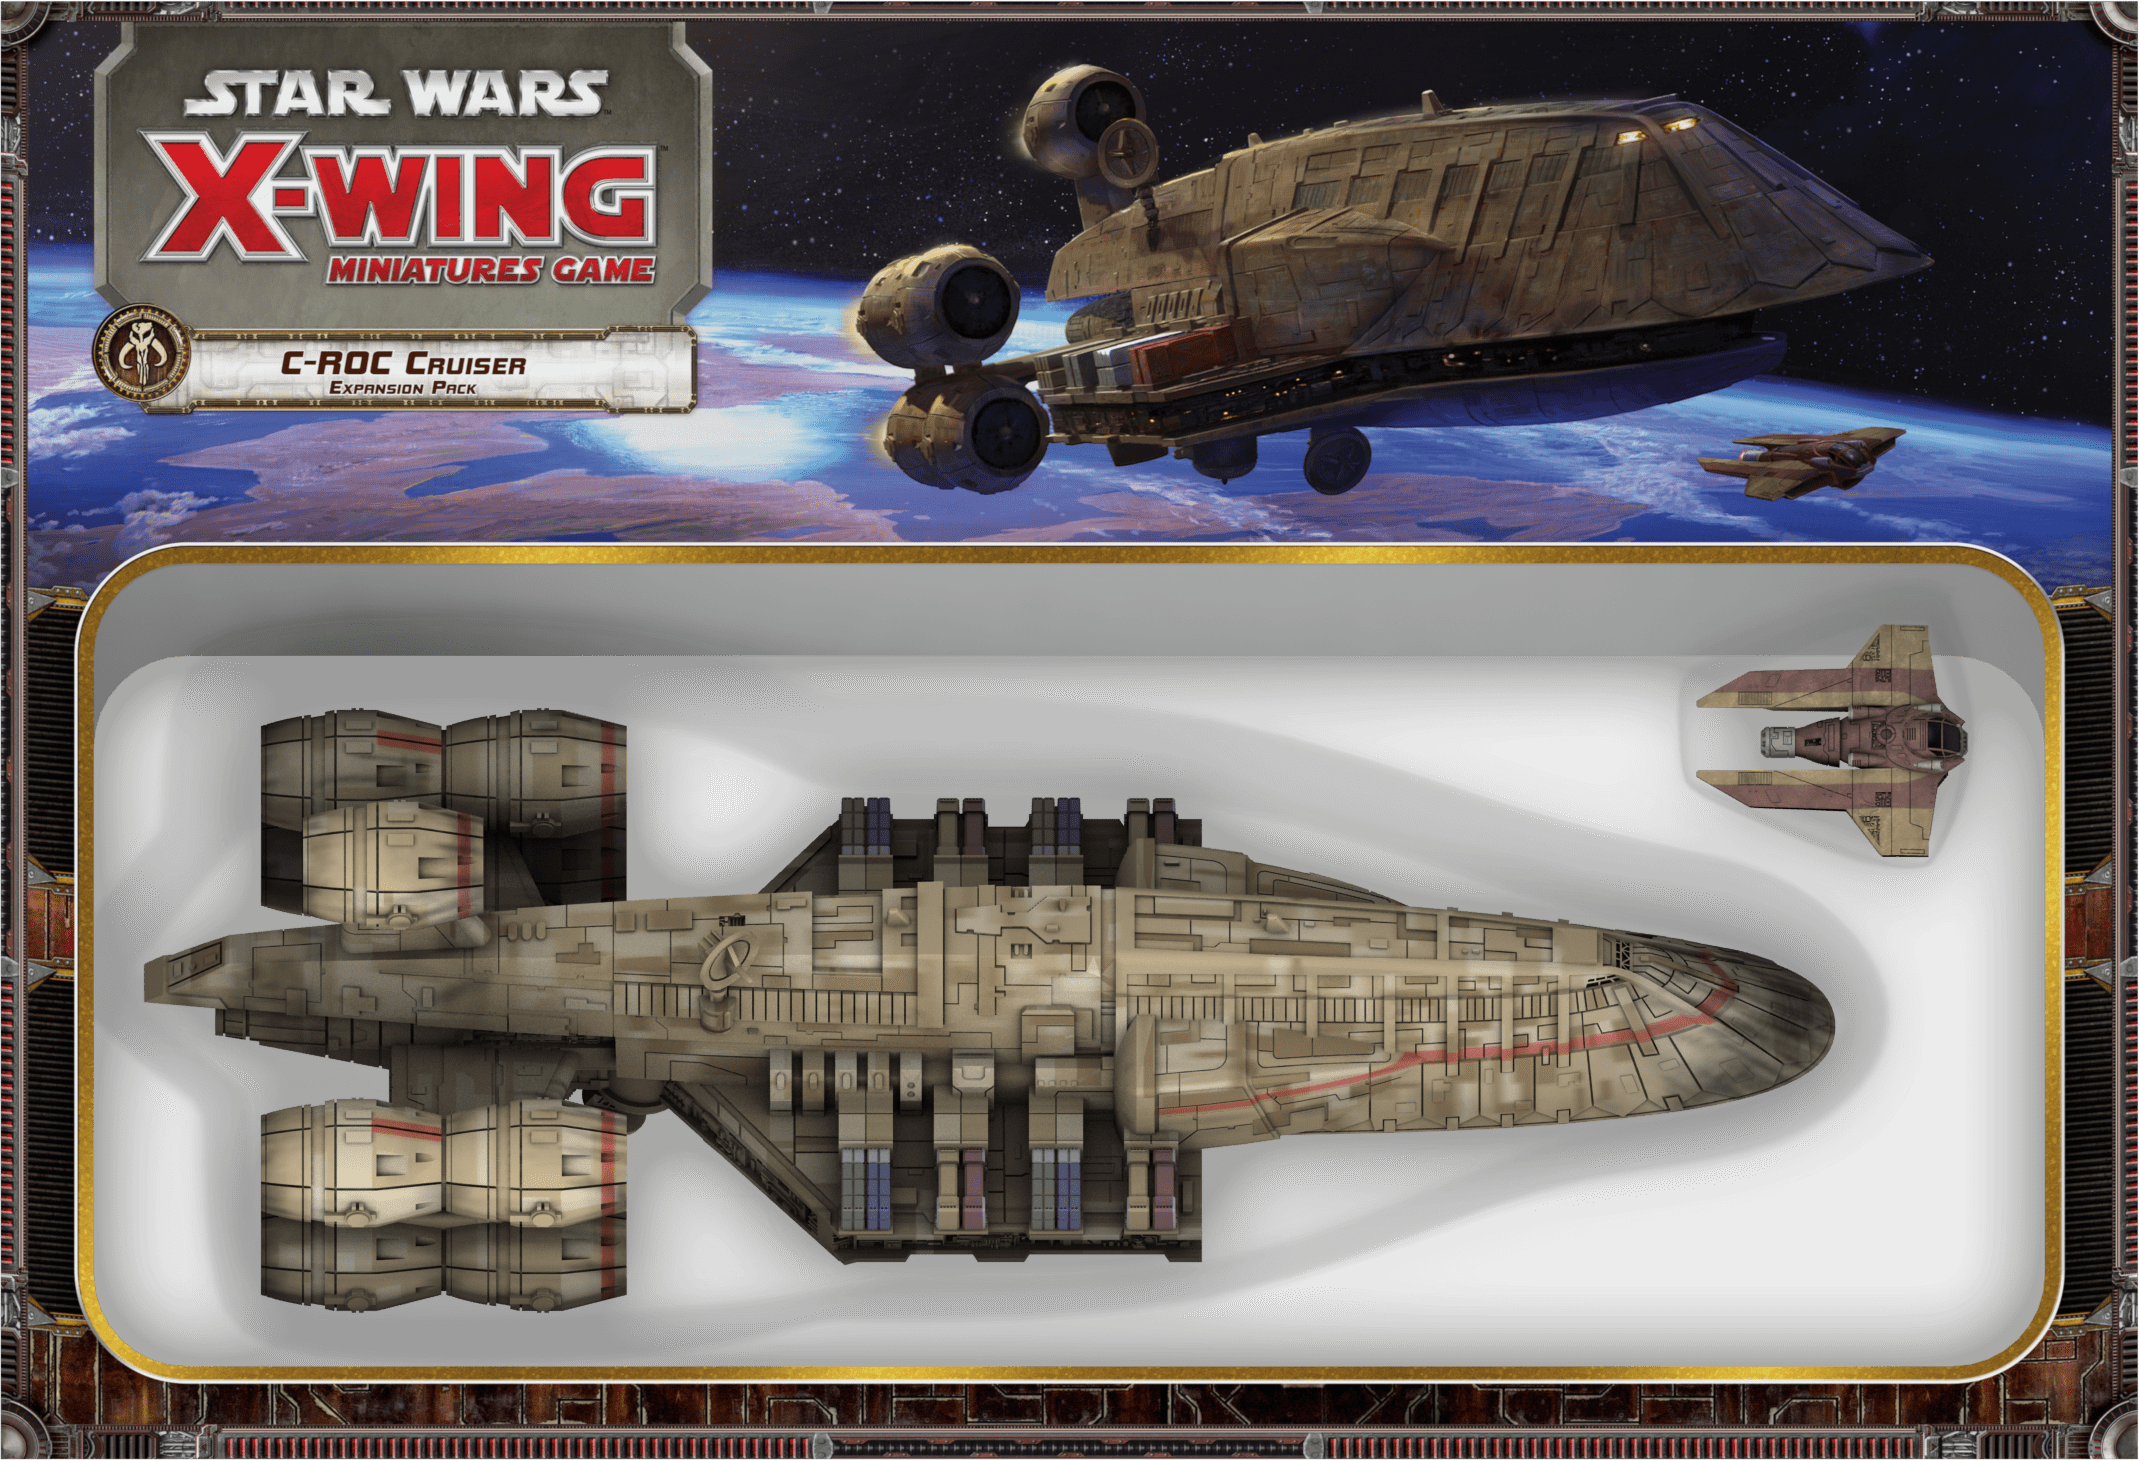 Star Wars: X-Wing Miniatures Game – C-ROC Cruiser Expansion Pack